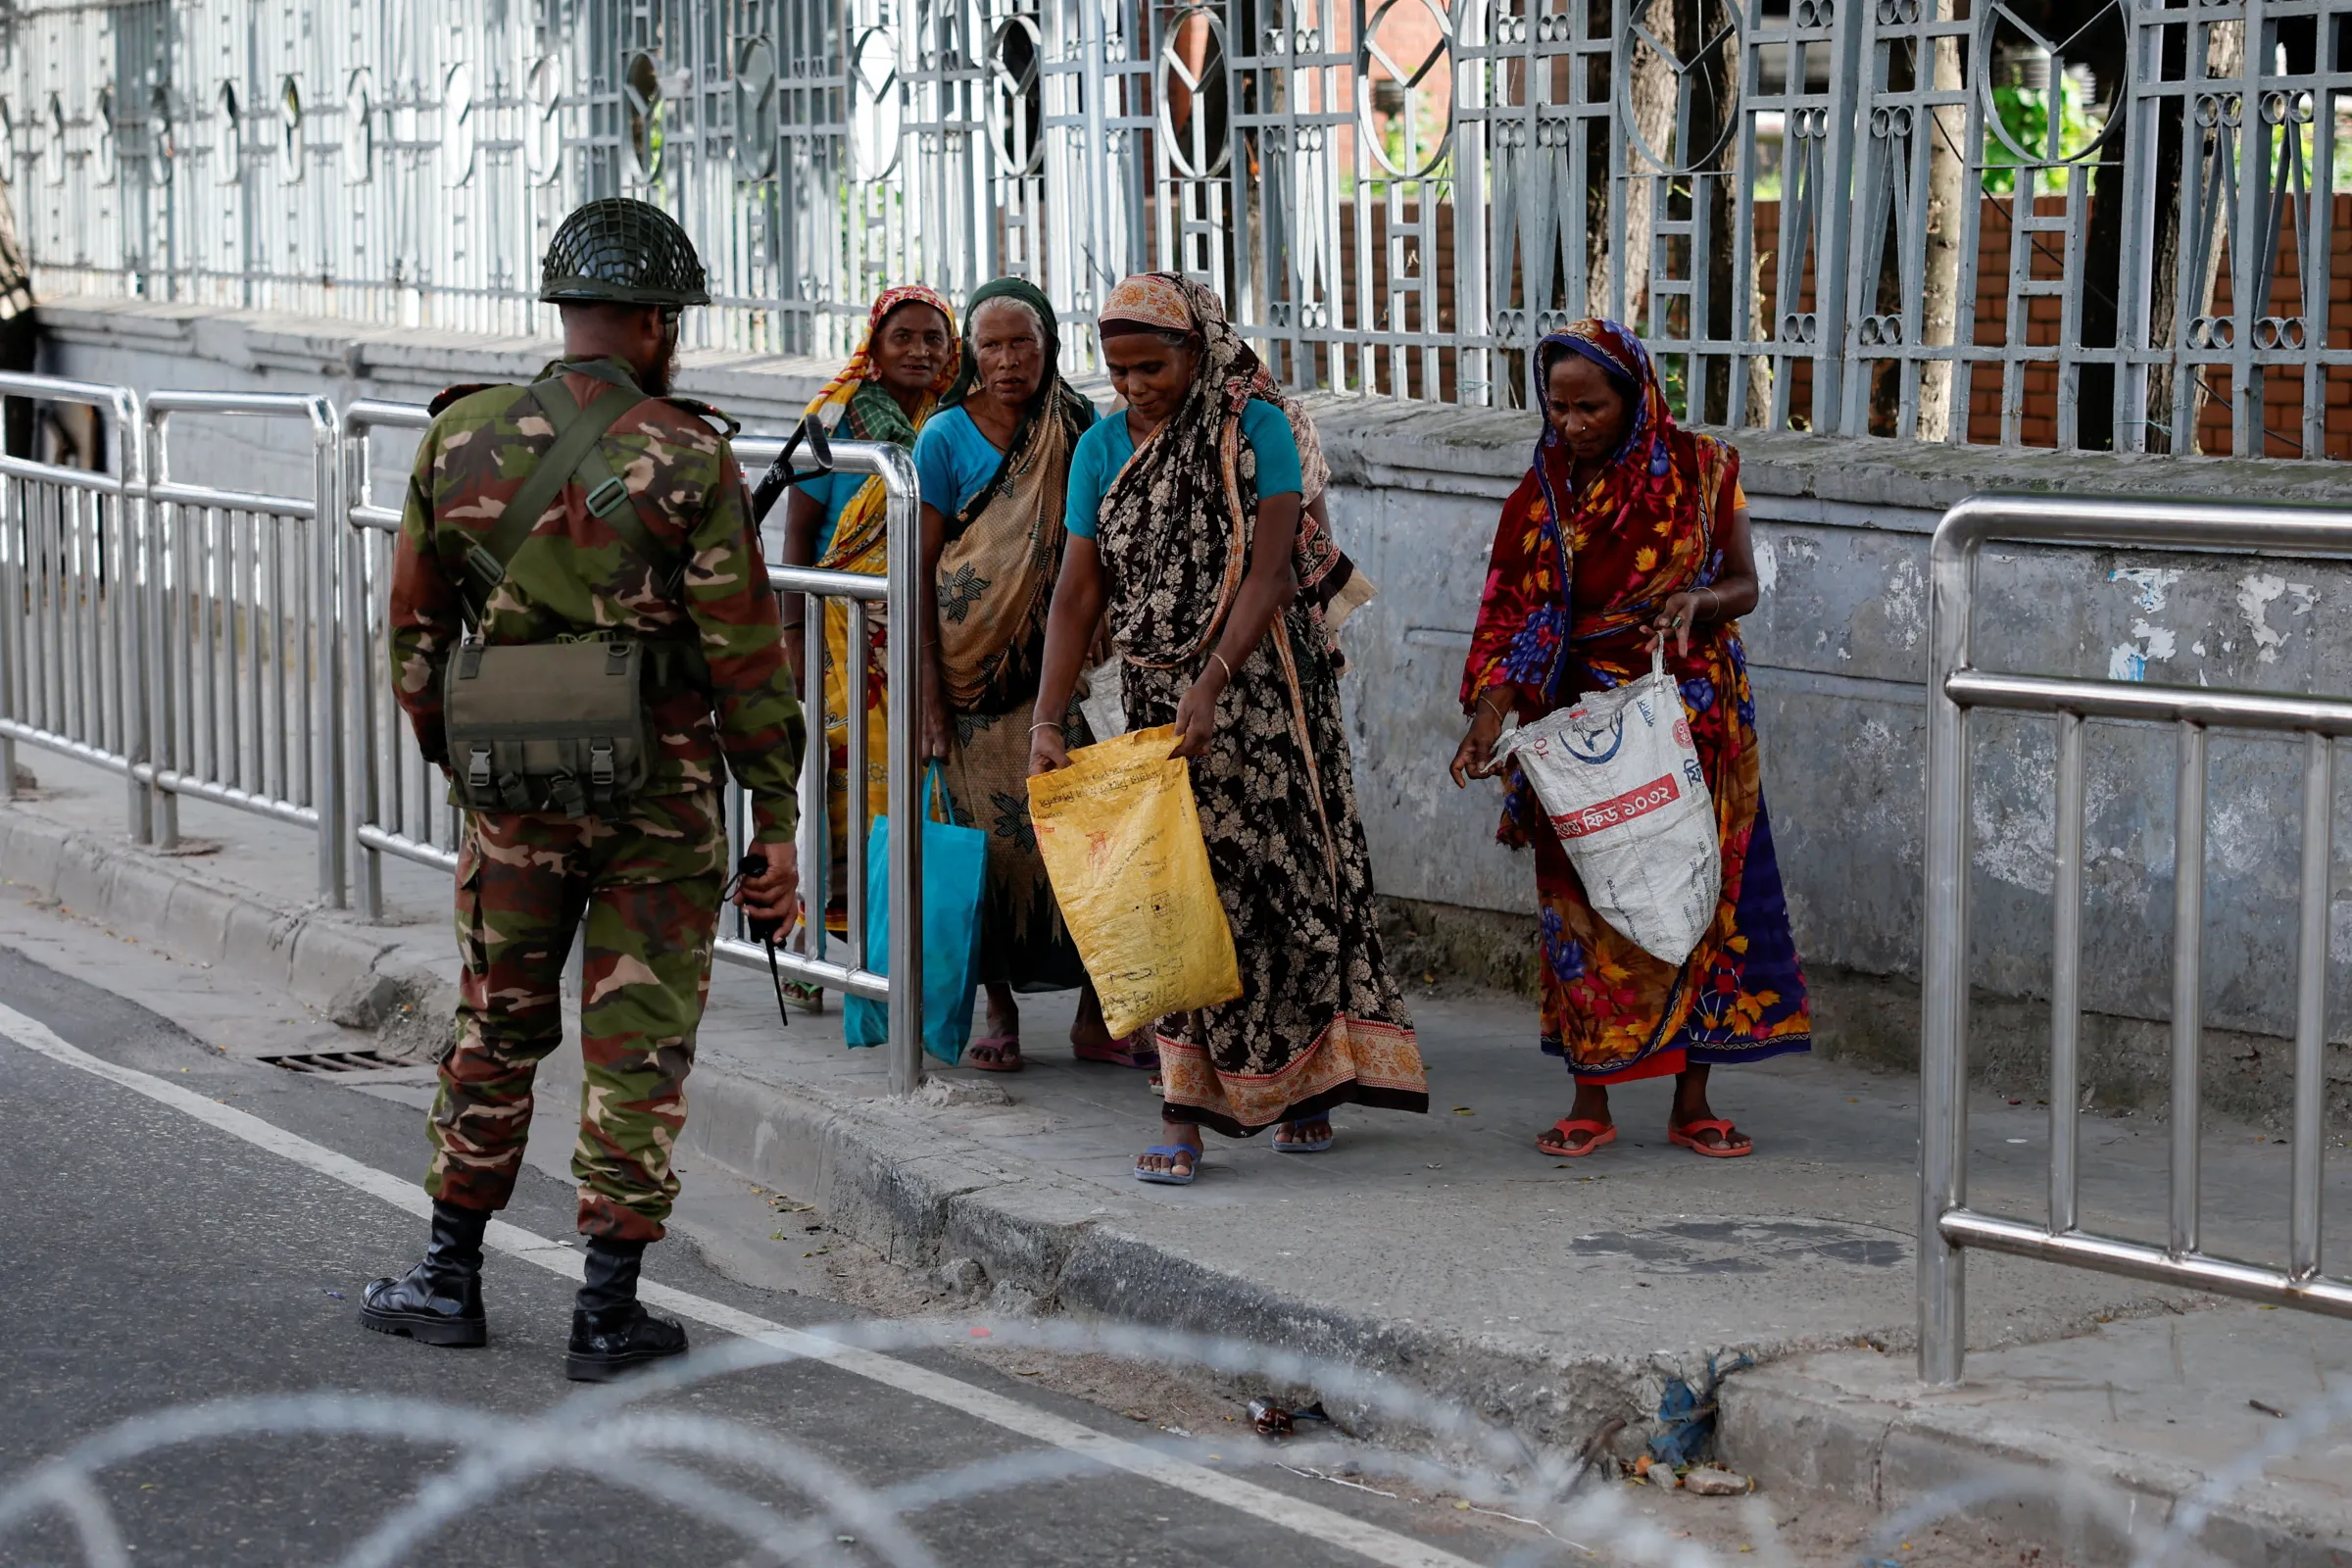 A member of the Bangladesh Army checks bags of women during a curfew imposed in response to student-led protests against government job quotas, in Dhaka, Bangladesh, July 20, 2024. REUTERS/Mohammad Ponir Hossain